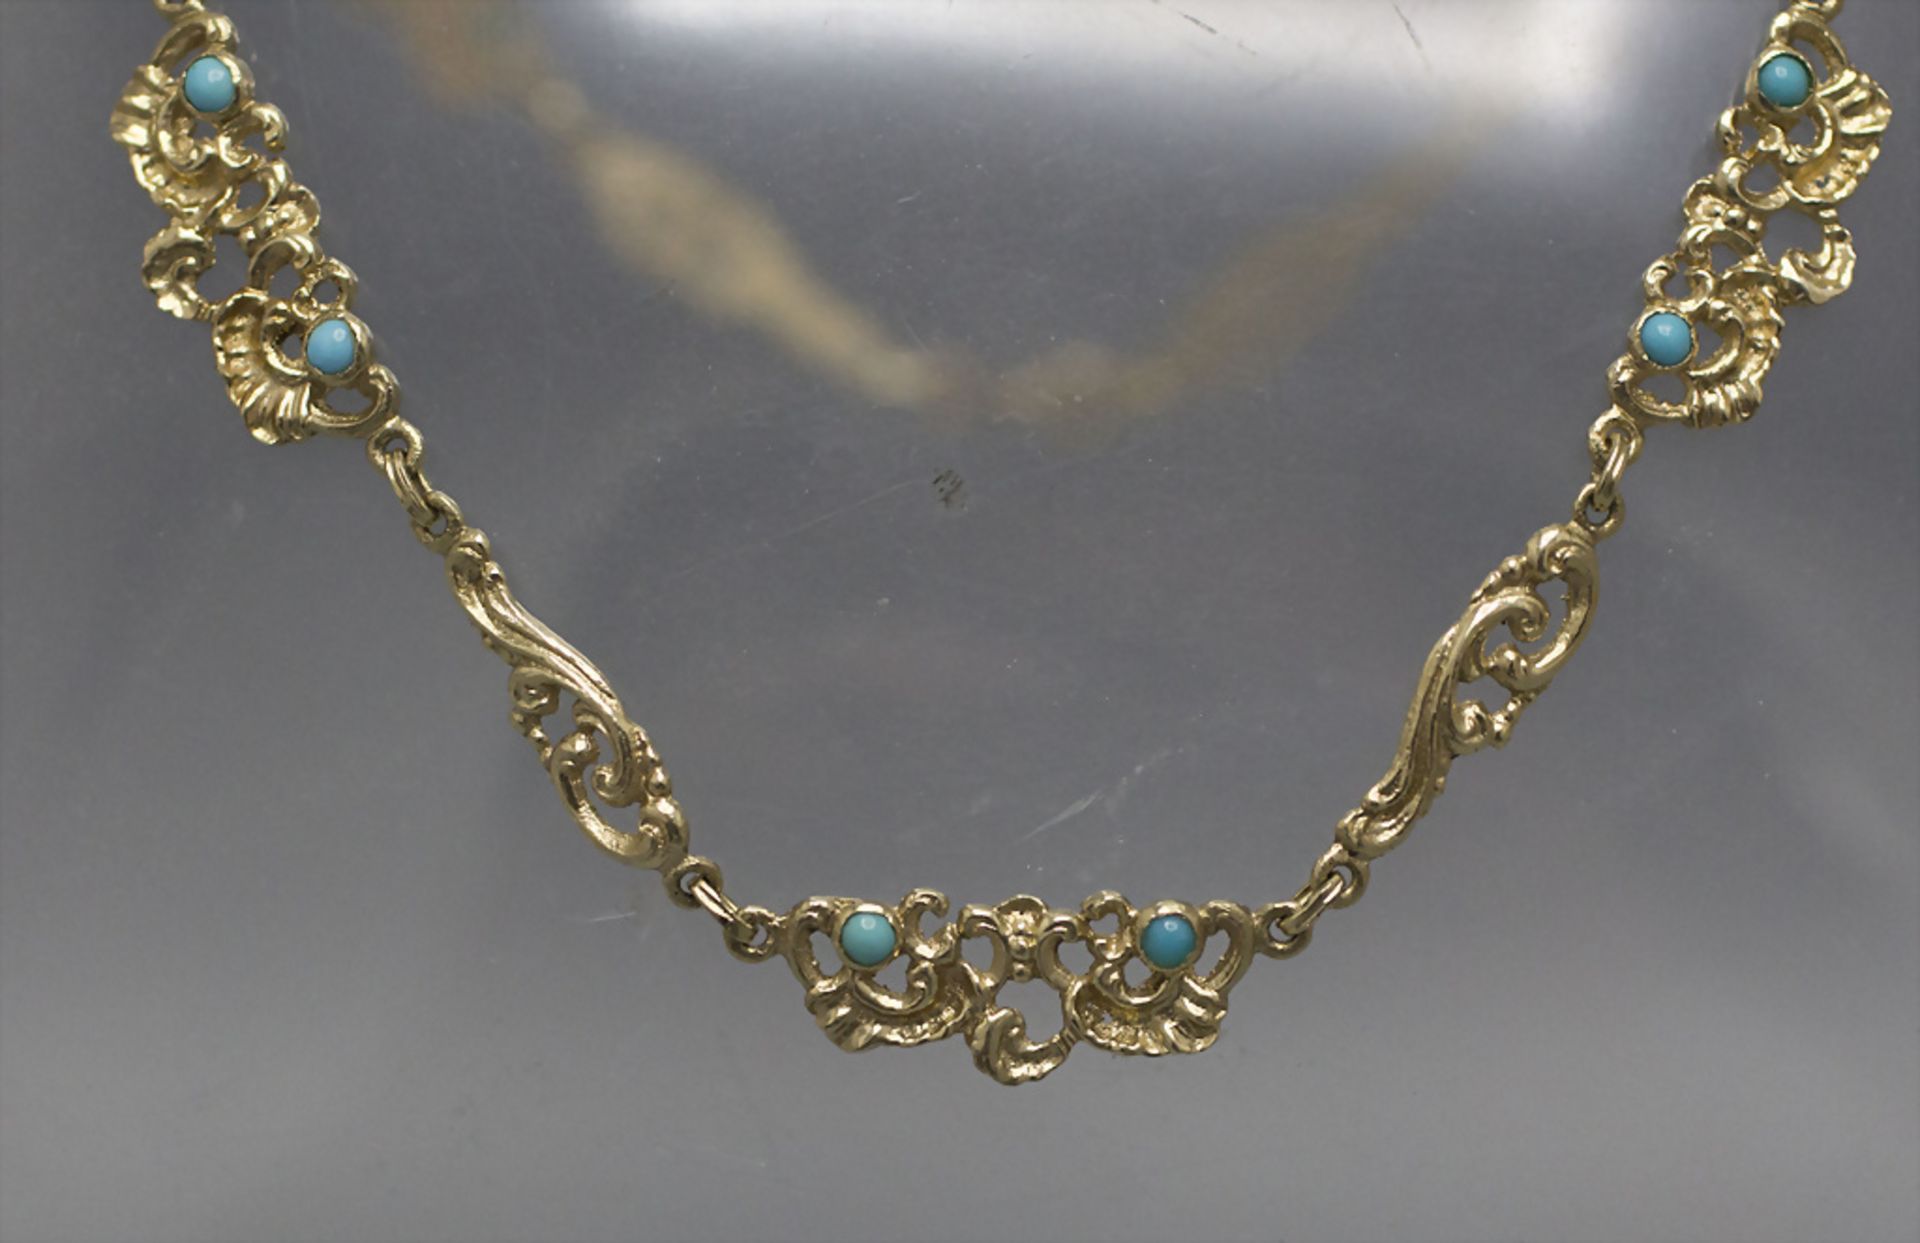 Halskette mit Türkisen / A 14 ct gold necklace with turquoises - Image 2 of 2